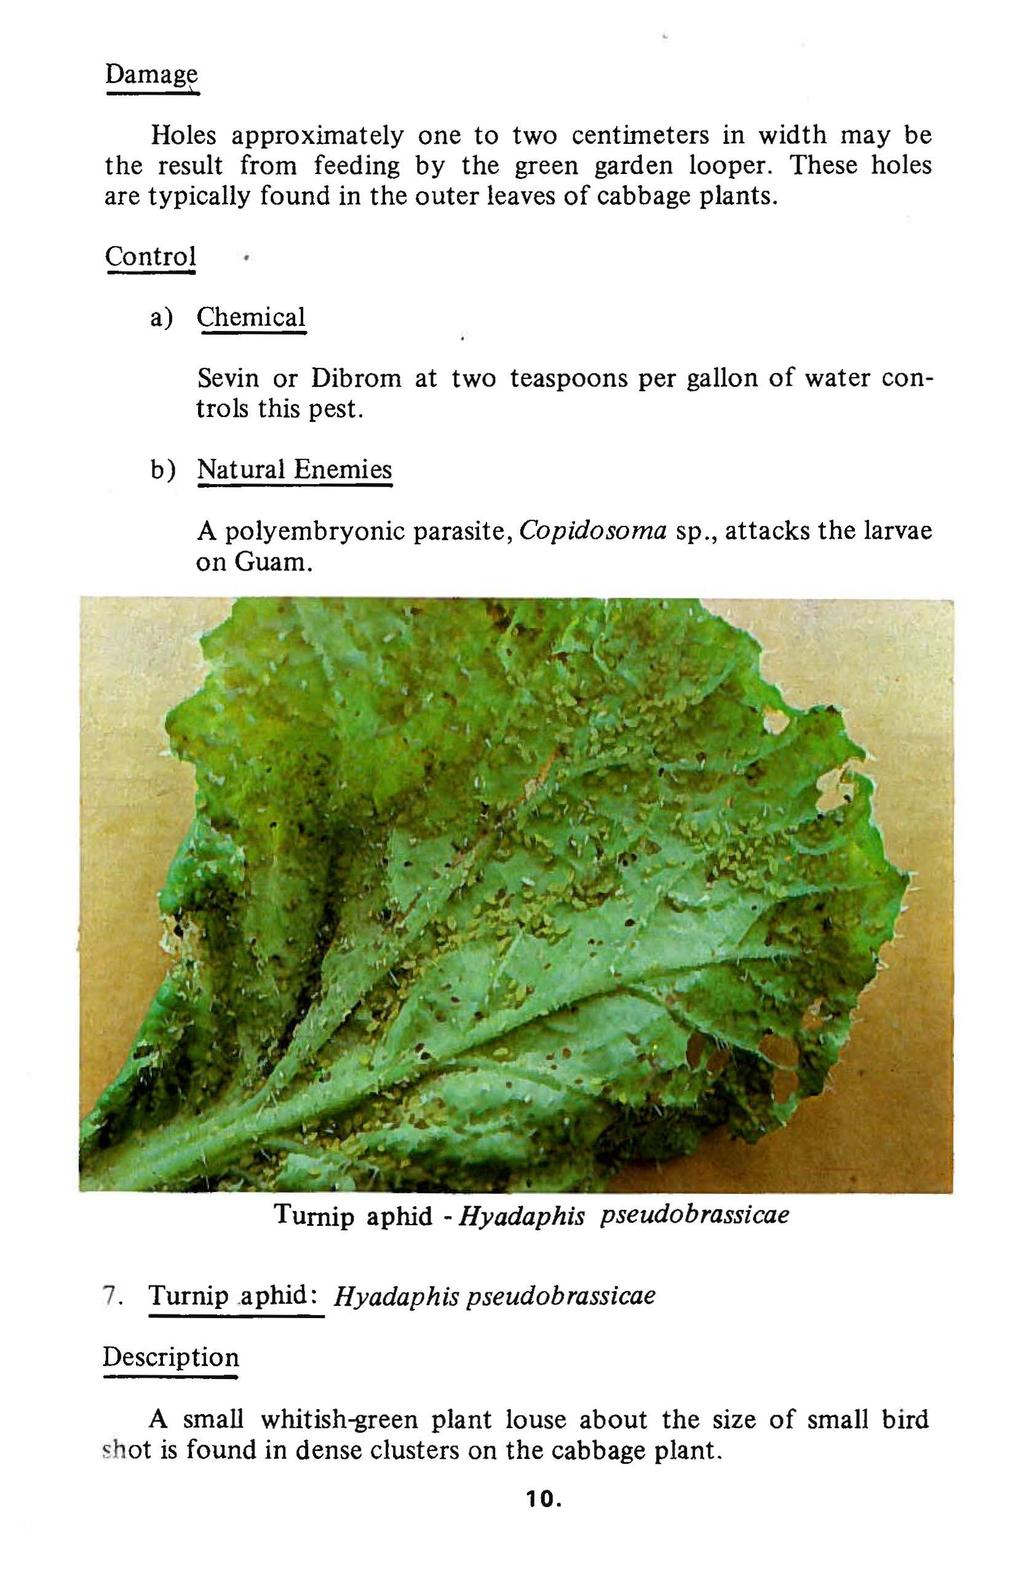 Damage Holes approximately one to two centimeters in width may be the result from feeding by the green garden looper. These holes are typically found in the outer leaves of cabbage plants.